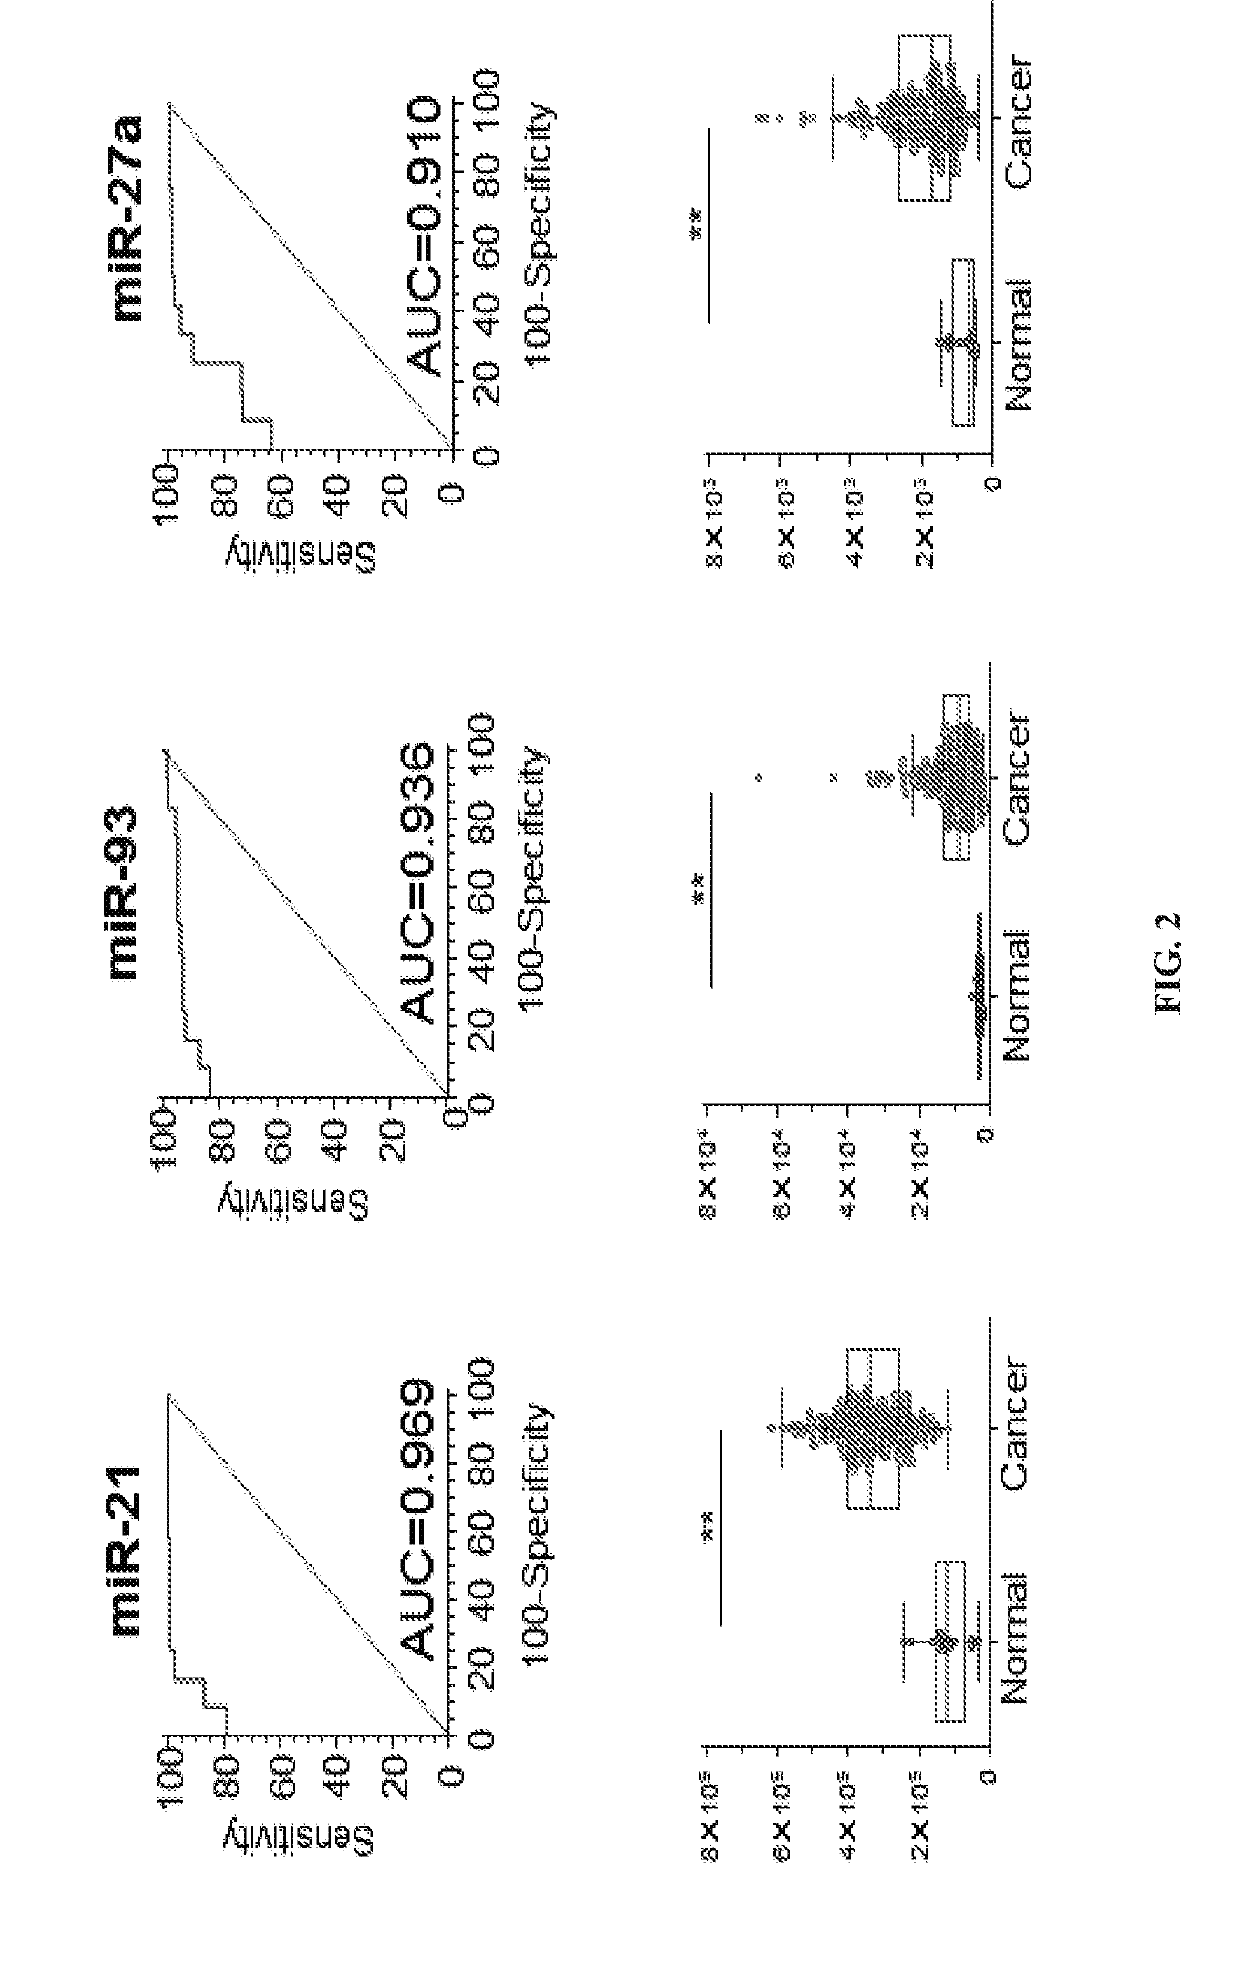 Methods for diagnosing and treating esophageal cancer